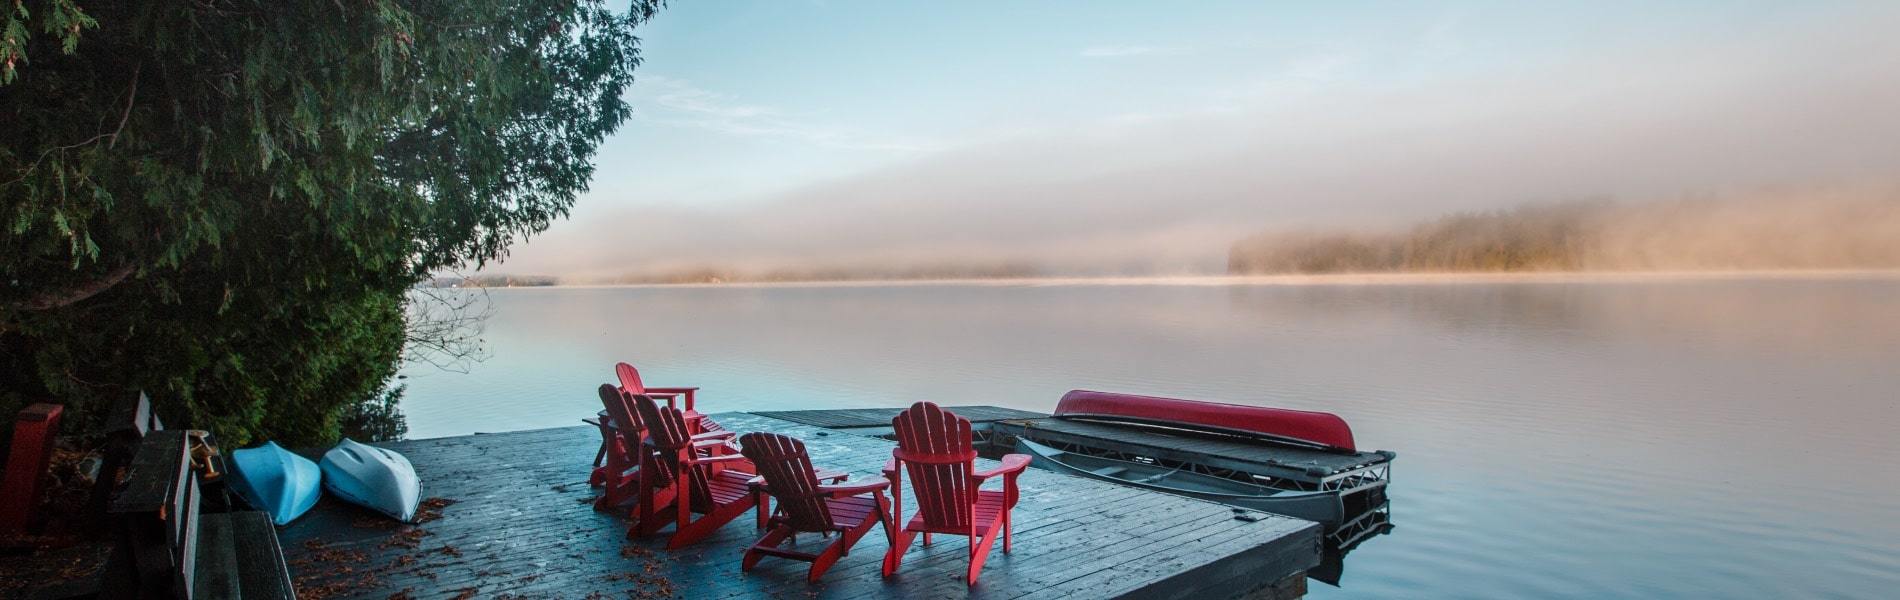 View of muskoka chairs on a dock typical of real estate on Ontario lakes